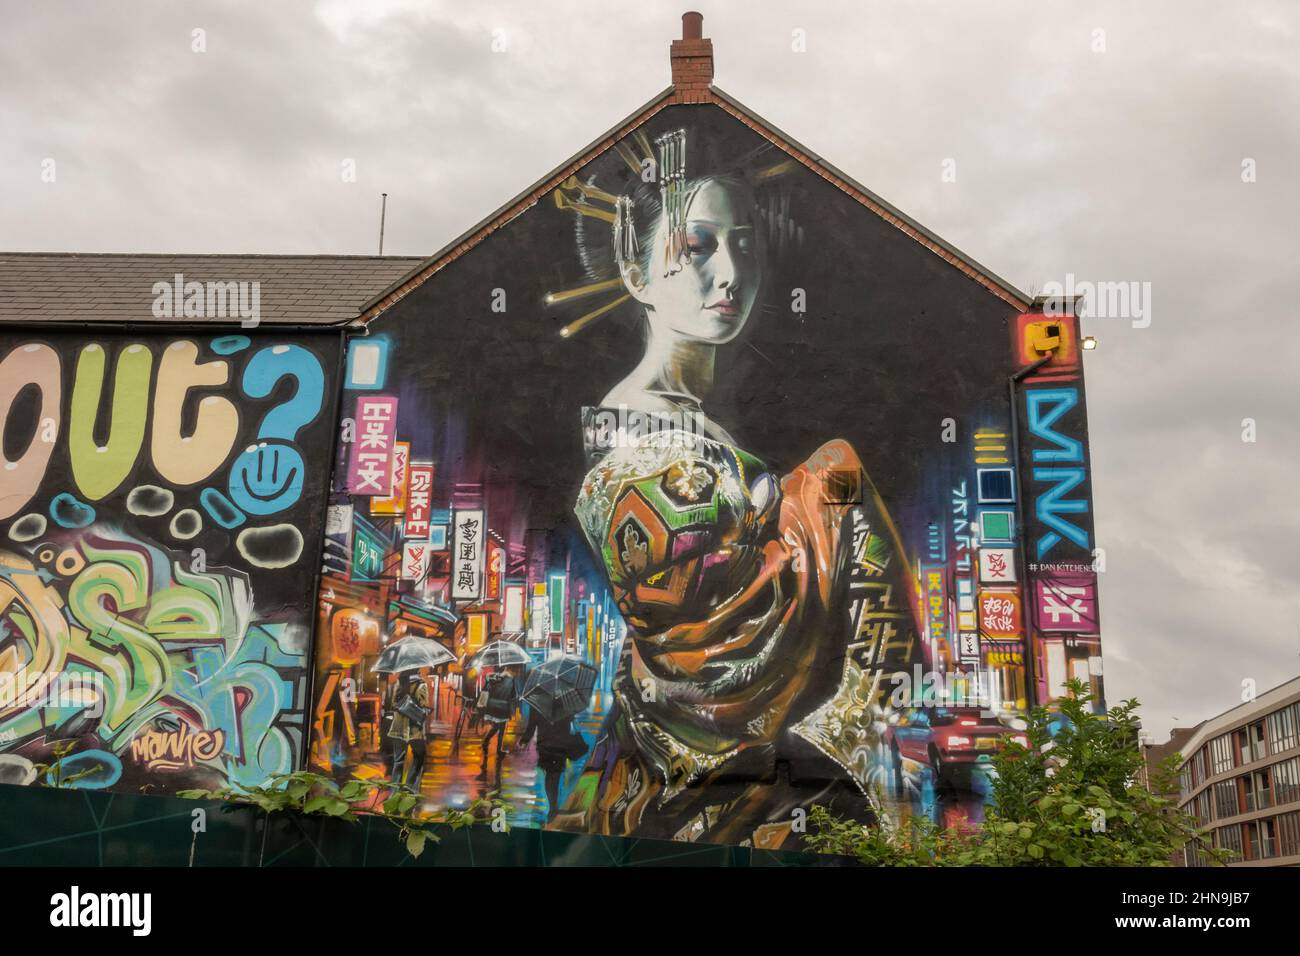 Street art by Dan Kitchener (Dank), in the old docks area of Kingston Upon Hull, East Riding of Yorkshire, UK. Stock Photo